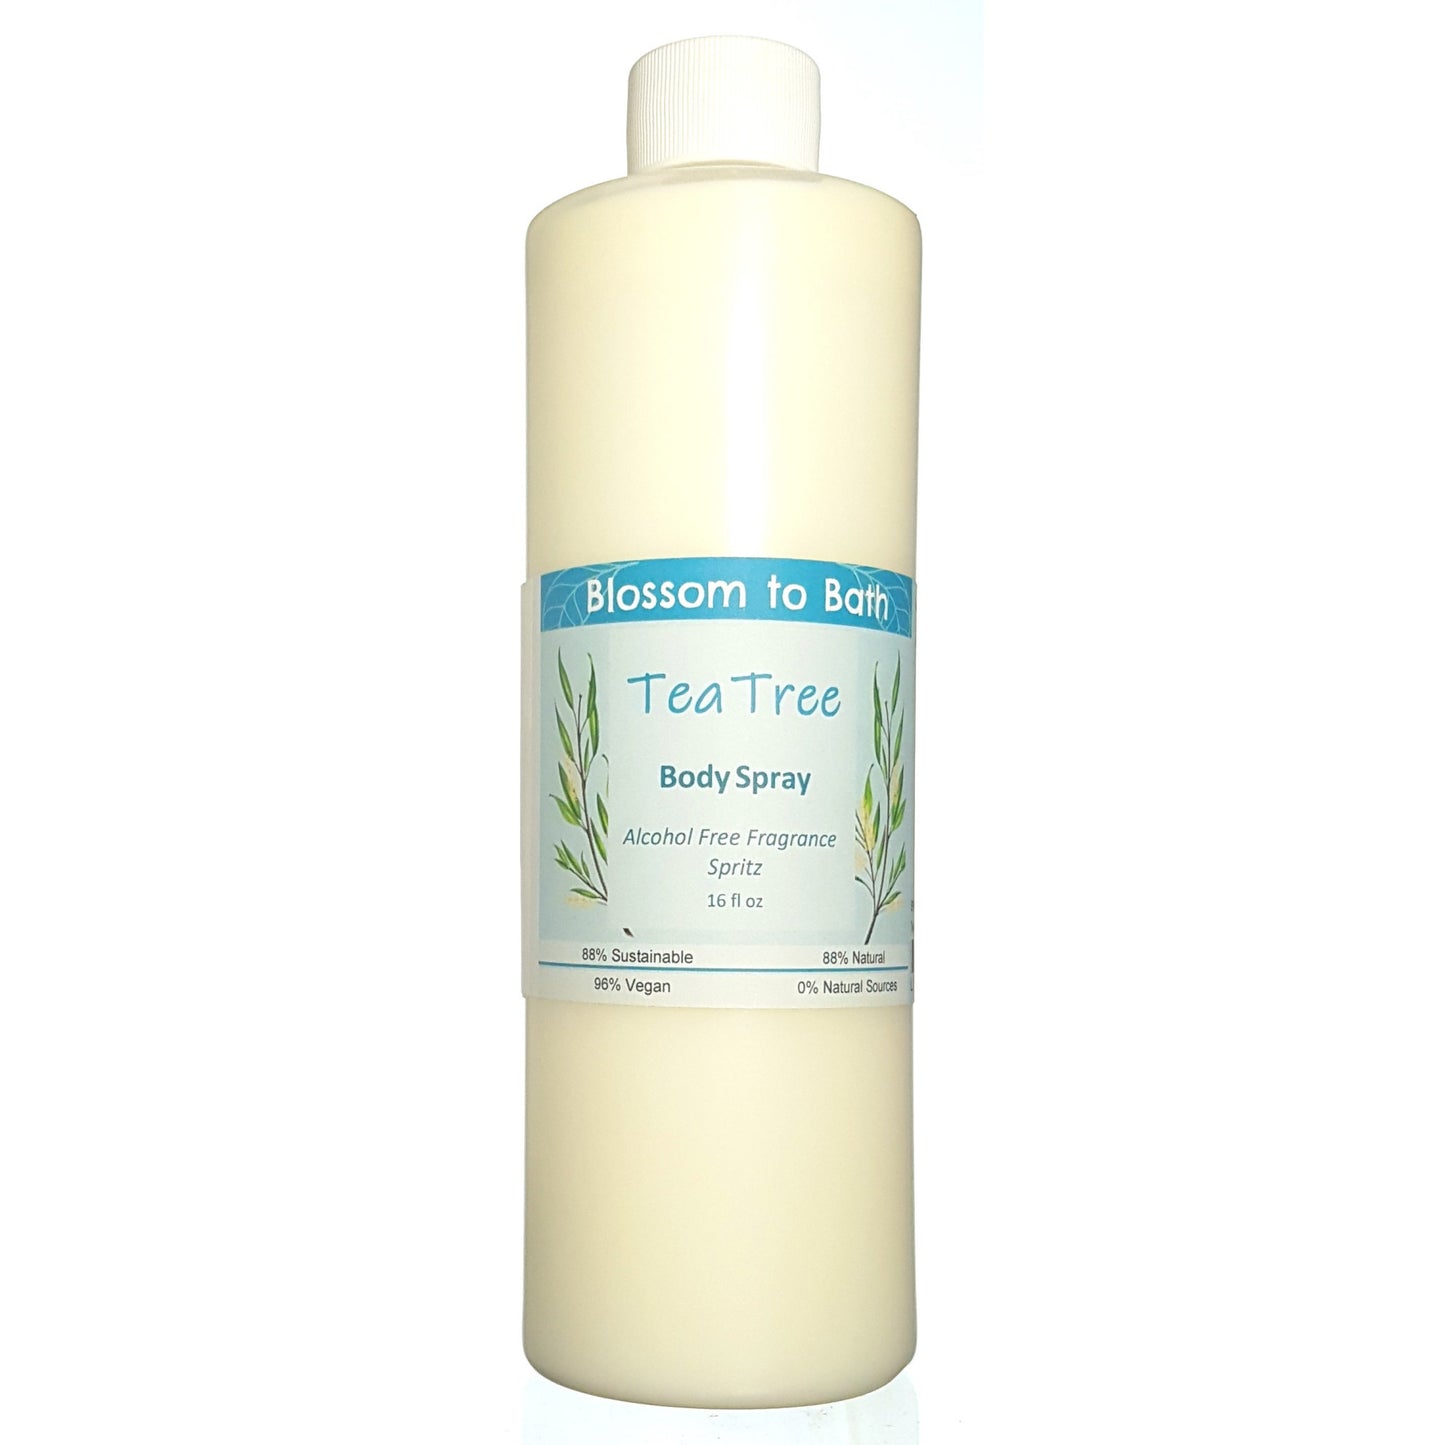 Buy Blossom to Bath Tea Tree Body Spray from Flowersong Soap Studio.  Natural luxurious freshening of skin, linens, or air  Tea tree's fresh fragrance embodies a deep down clean.